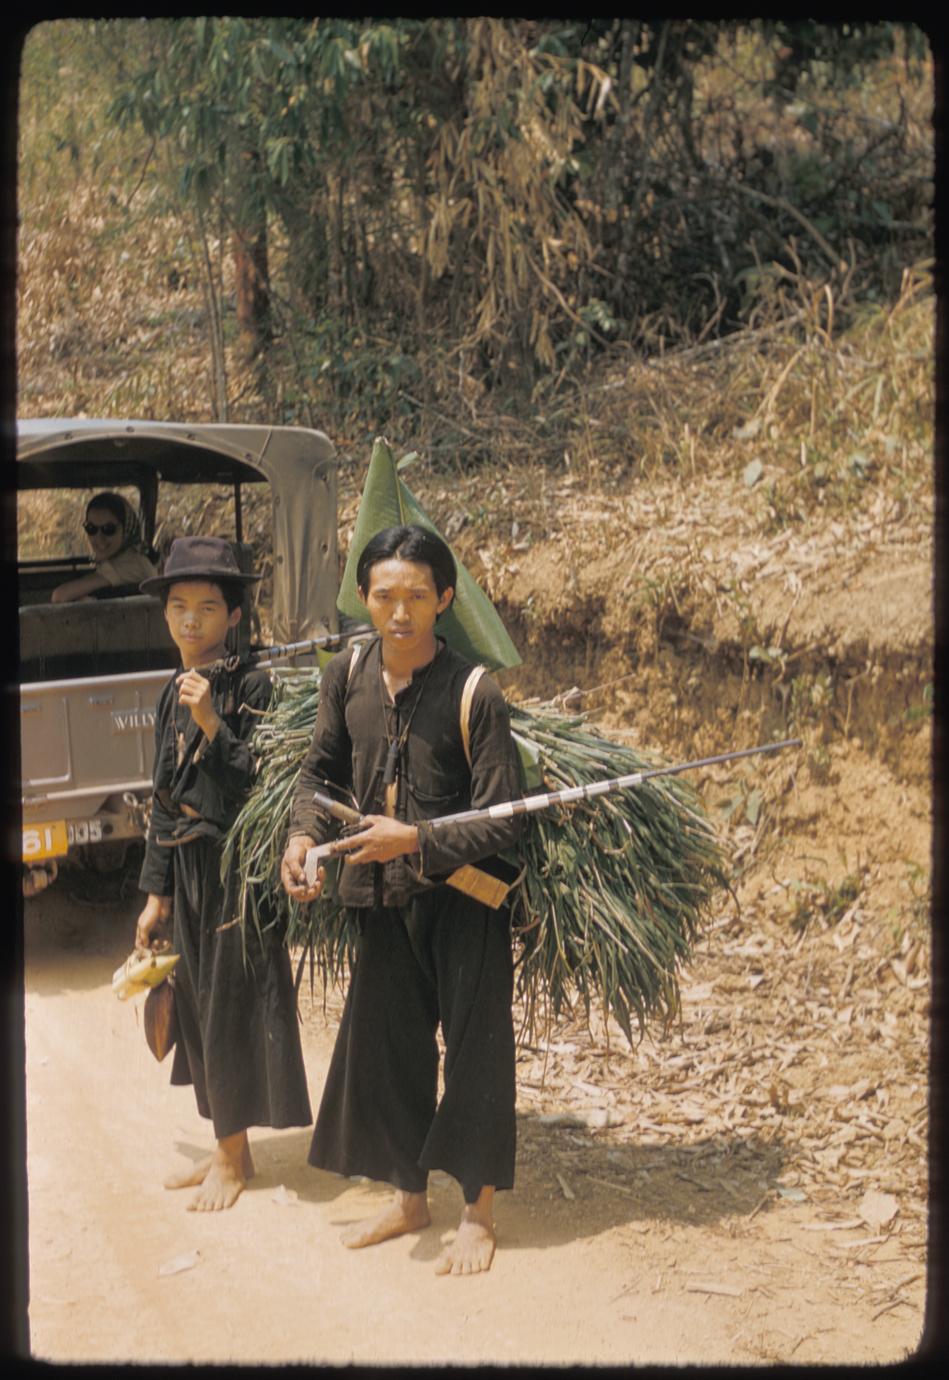 Hmong (Meo) with load of grass